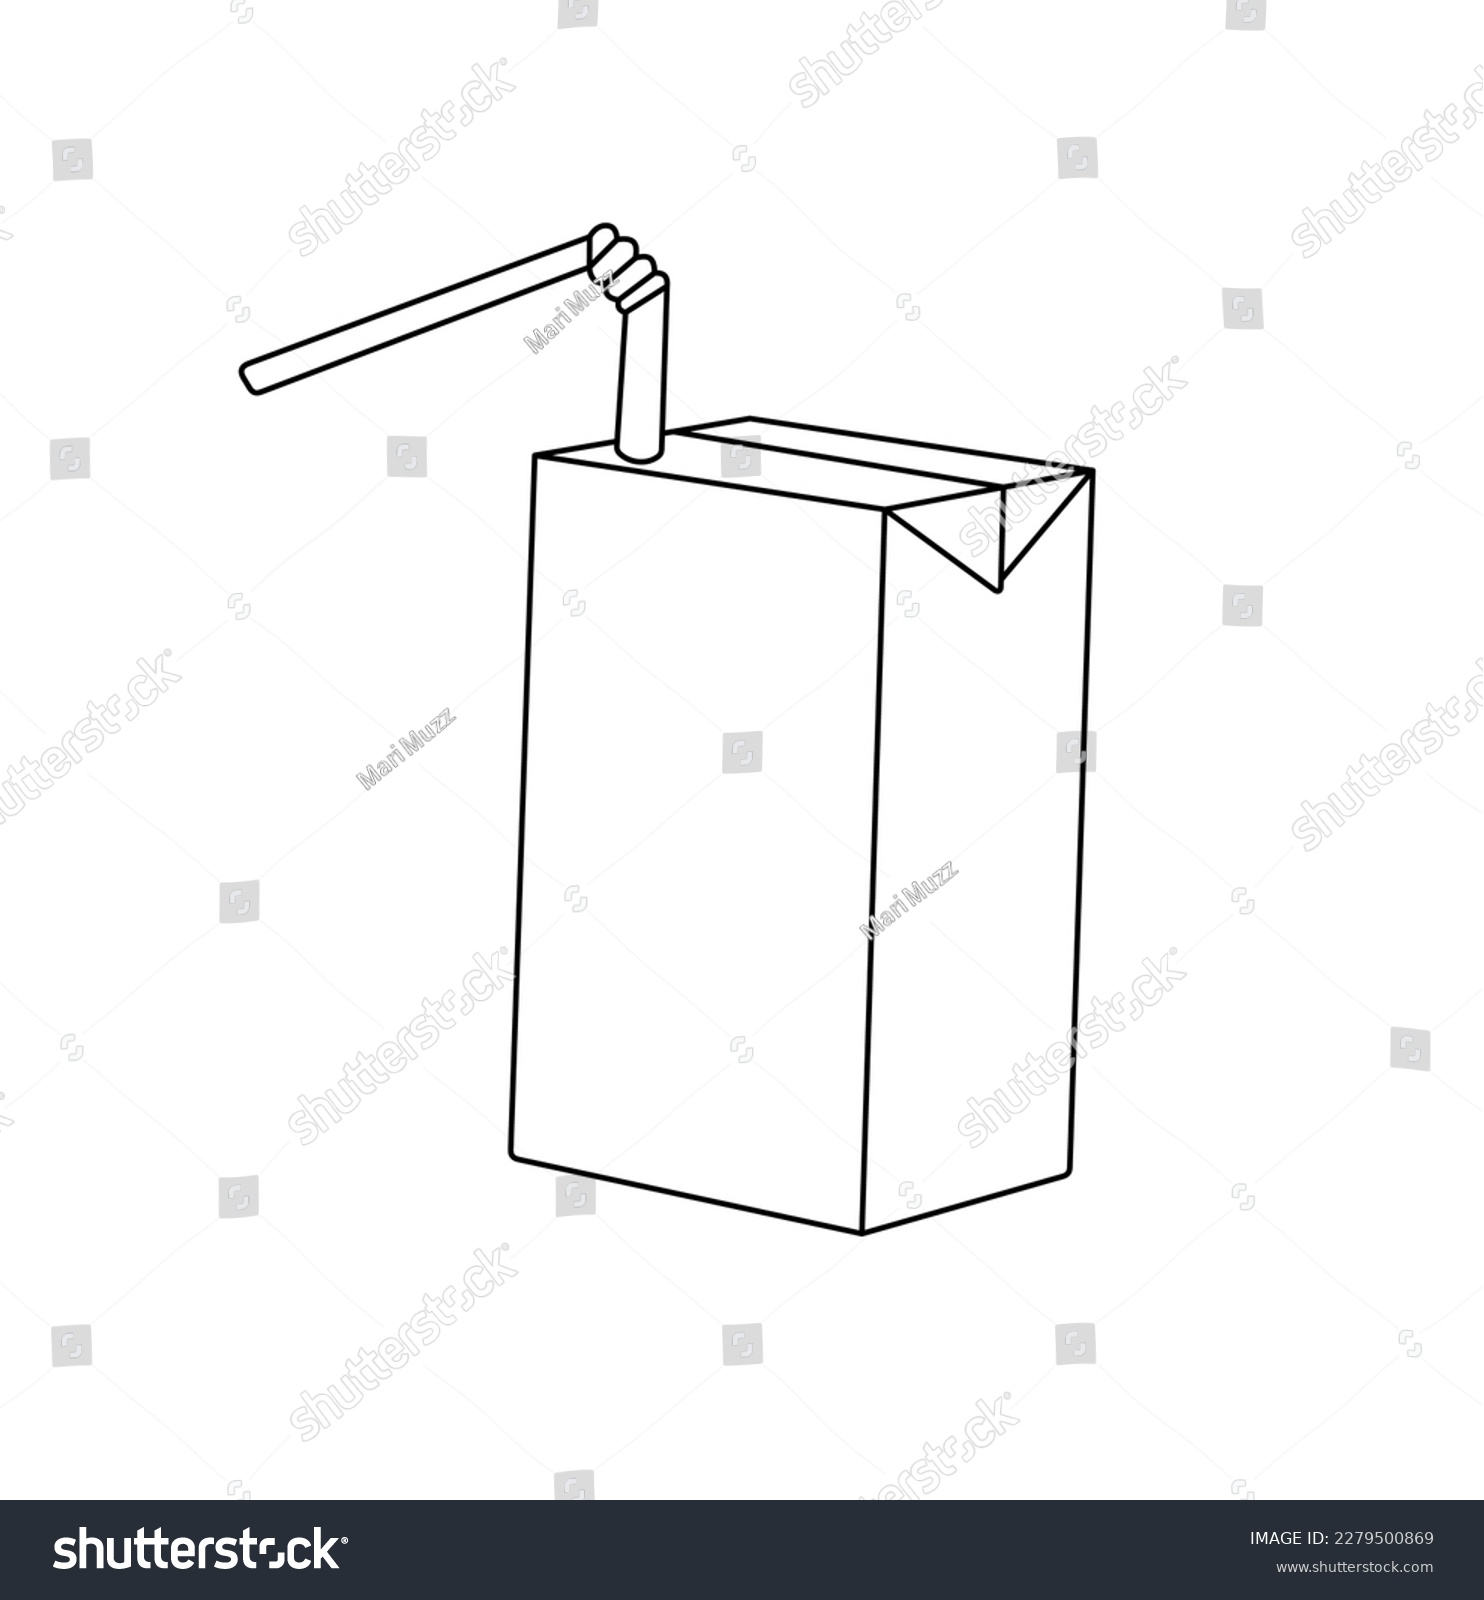 SVG of Vector isolated one single cardboard box small juice or milk pack with a straw colorless black and white contour line easy drawing svg